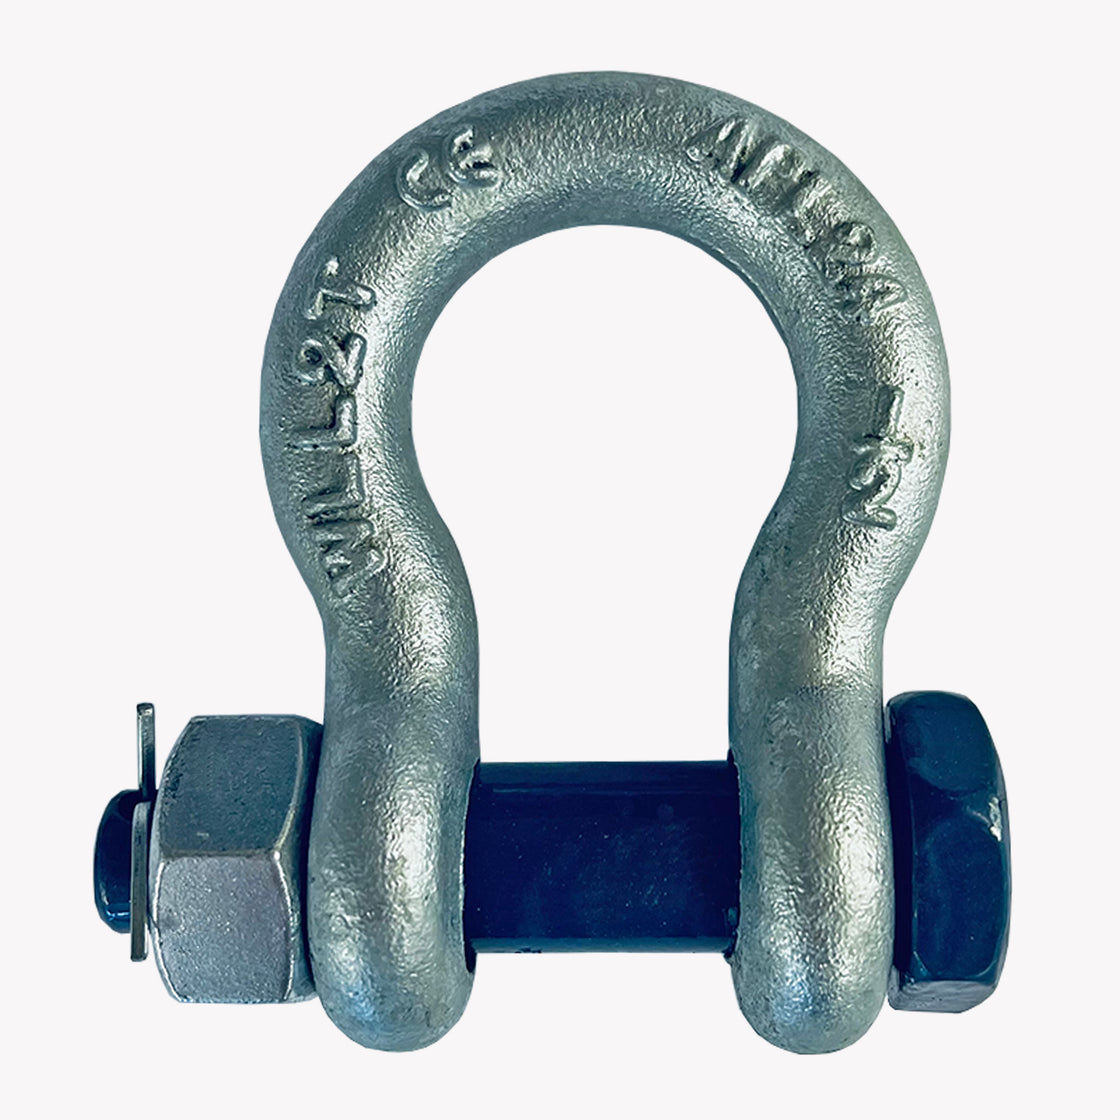 DROP FORGED SAFETY PIN BOW SHACKLE - US FEDERAL SPECIFICATION - PGS Supplies 21 Ltd